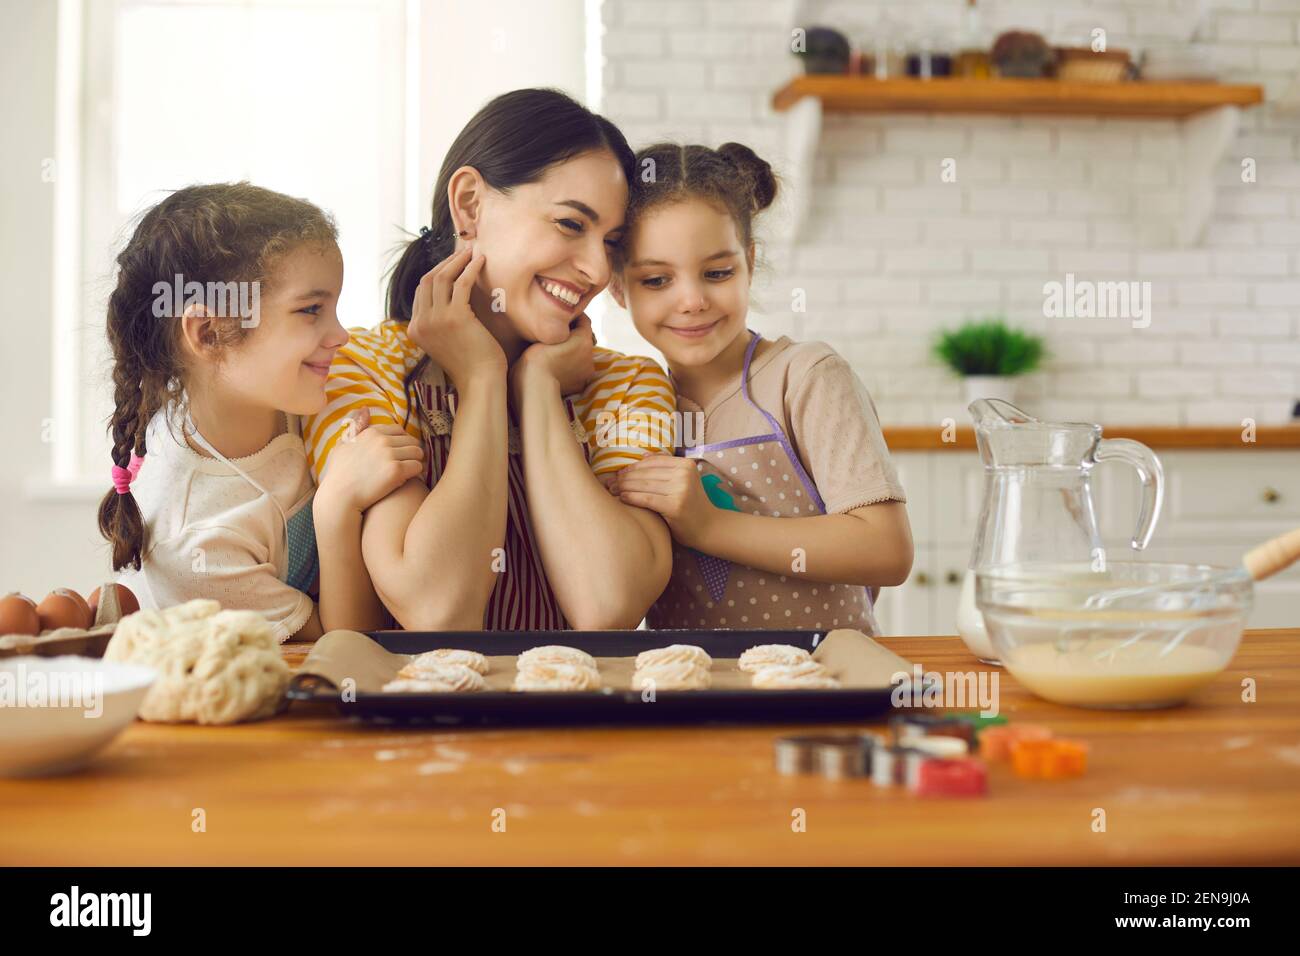 Cooking, baking, enjoying time with children concept Stock Photo